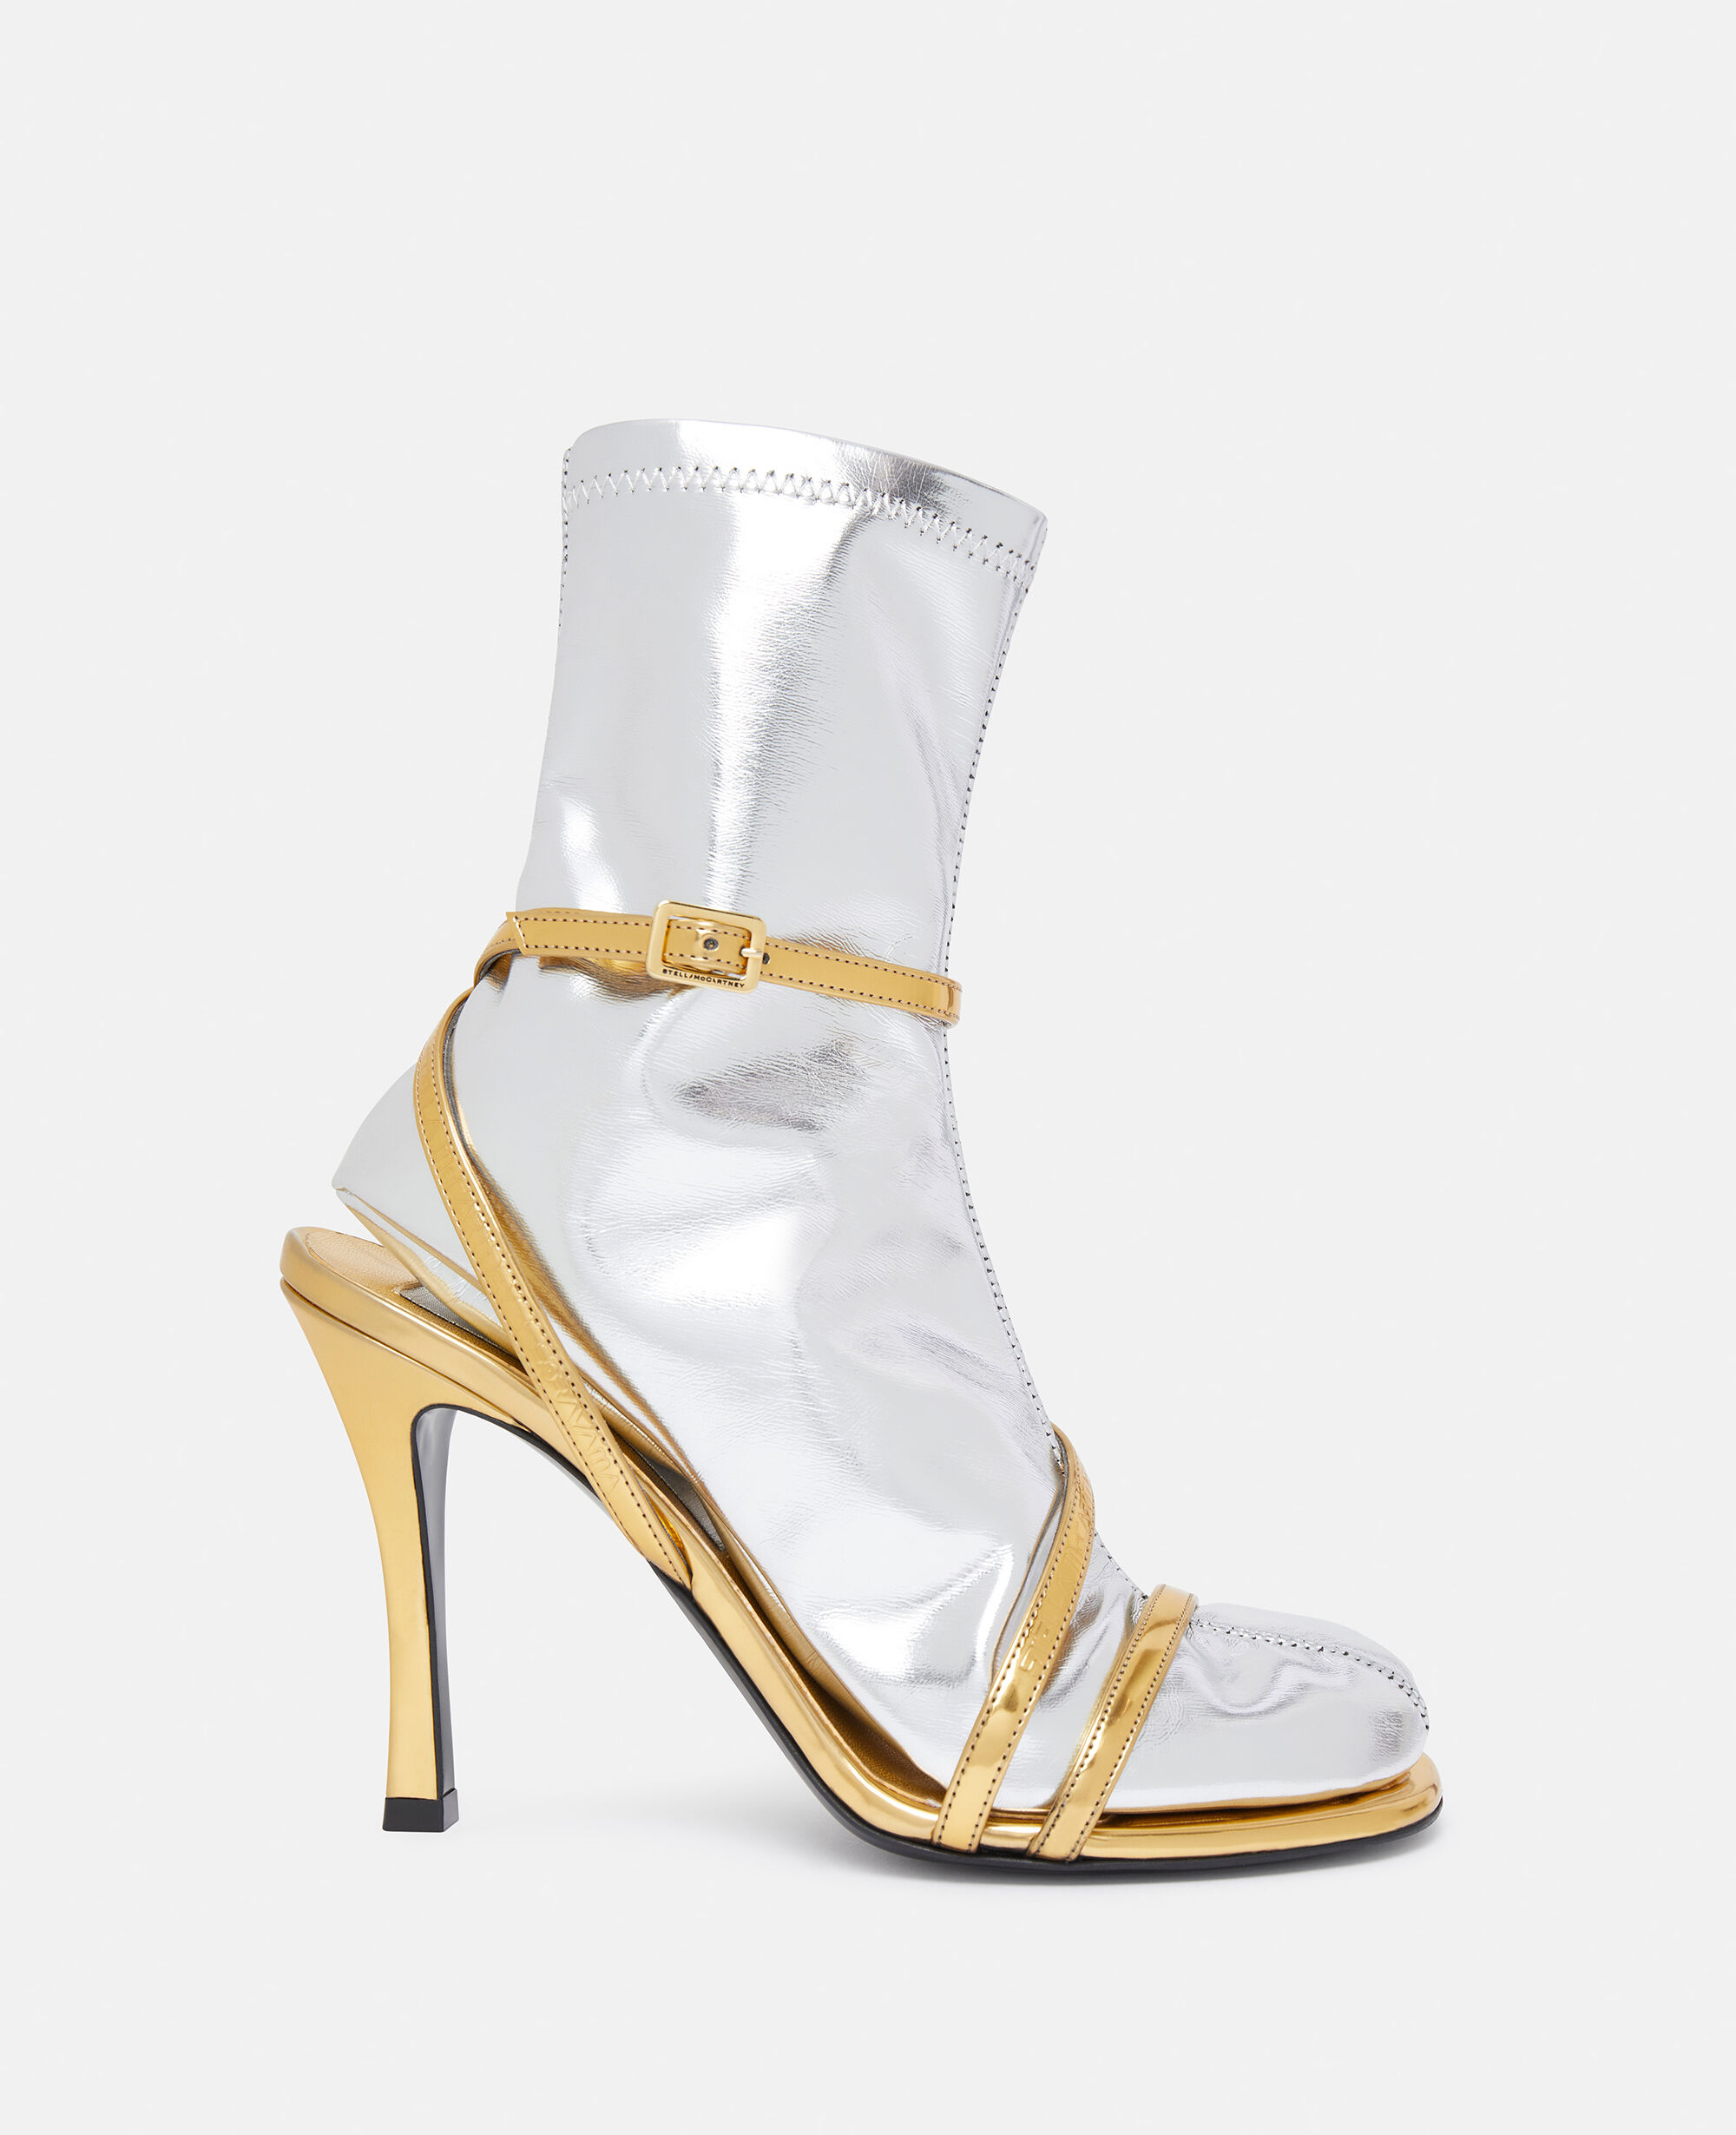 Buy Women Sandal Female Model T Station Catwalk Sexy Crystal Transparent  Shoes 15Cm High Heels Waterproof Head Sandals,White Sole 09,40 at Amazon.in